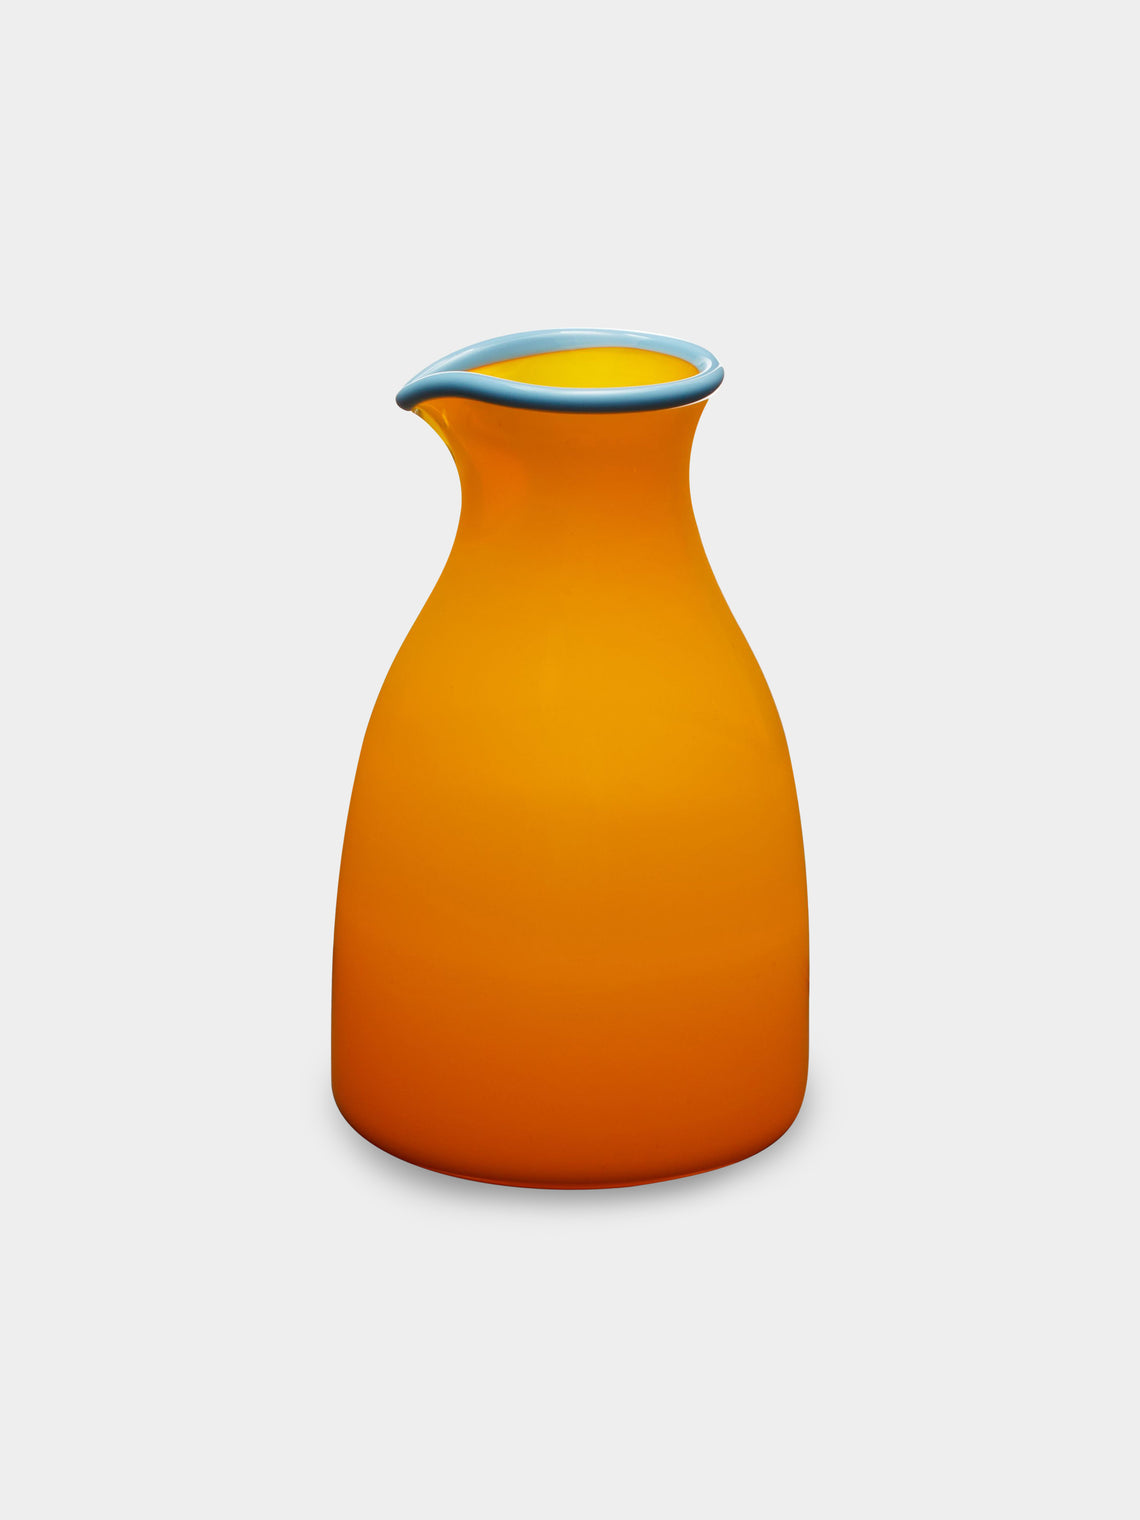 Andrew Iannazzi - Hand-Blown Glass Pourer -  - ABASK - 